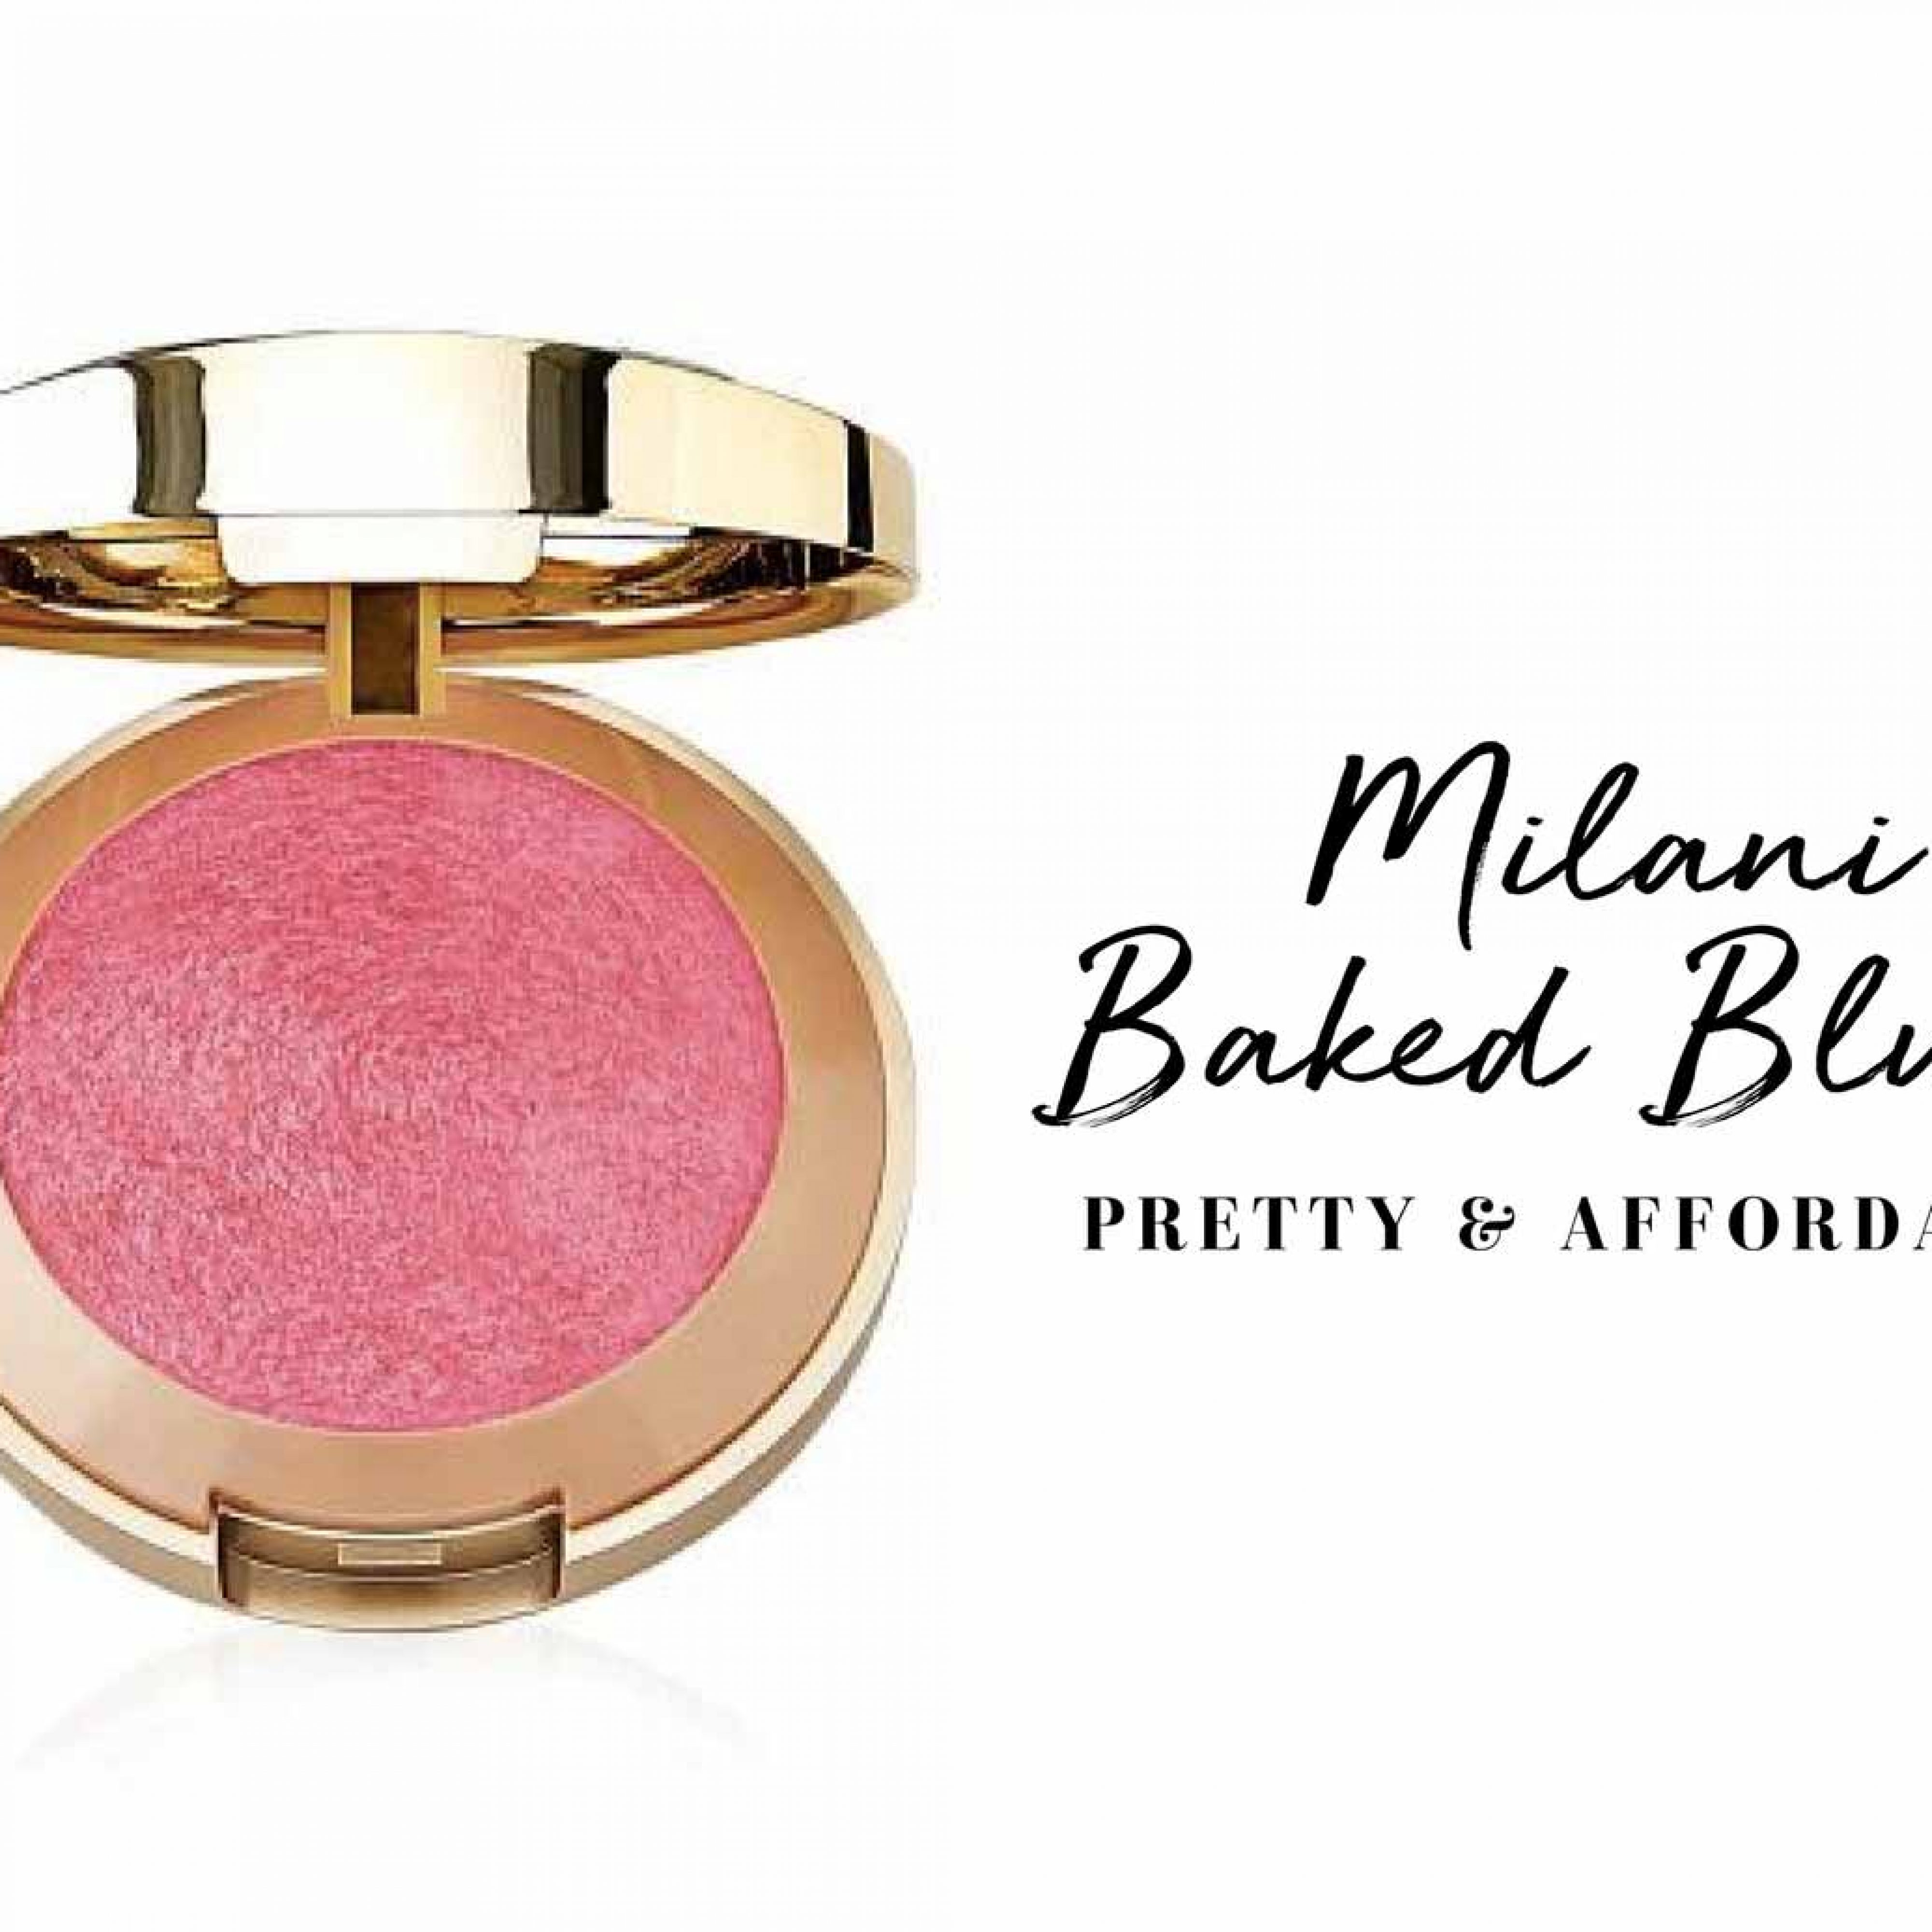 Milani-Baked-Blush-is-Beautiful-and-Affordable